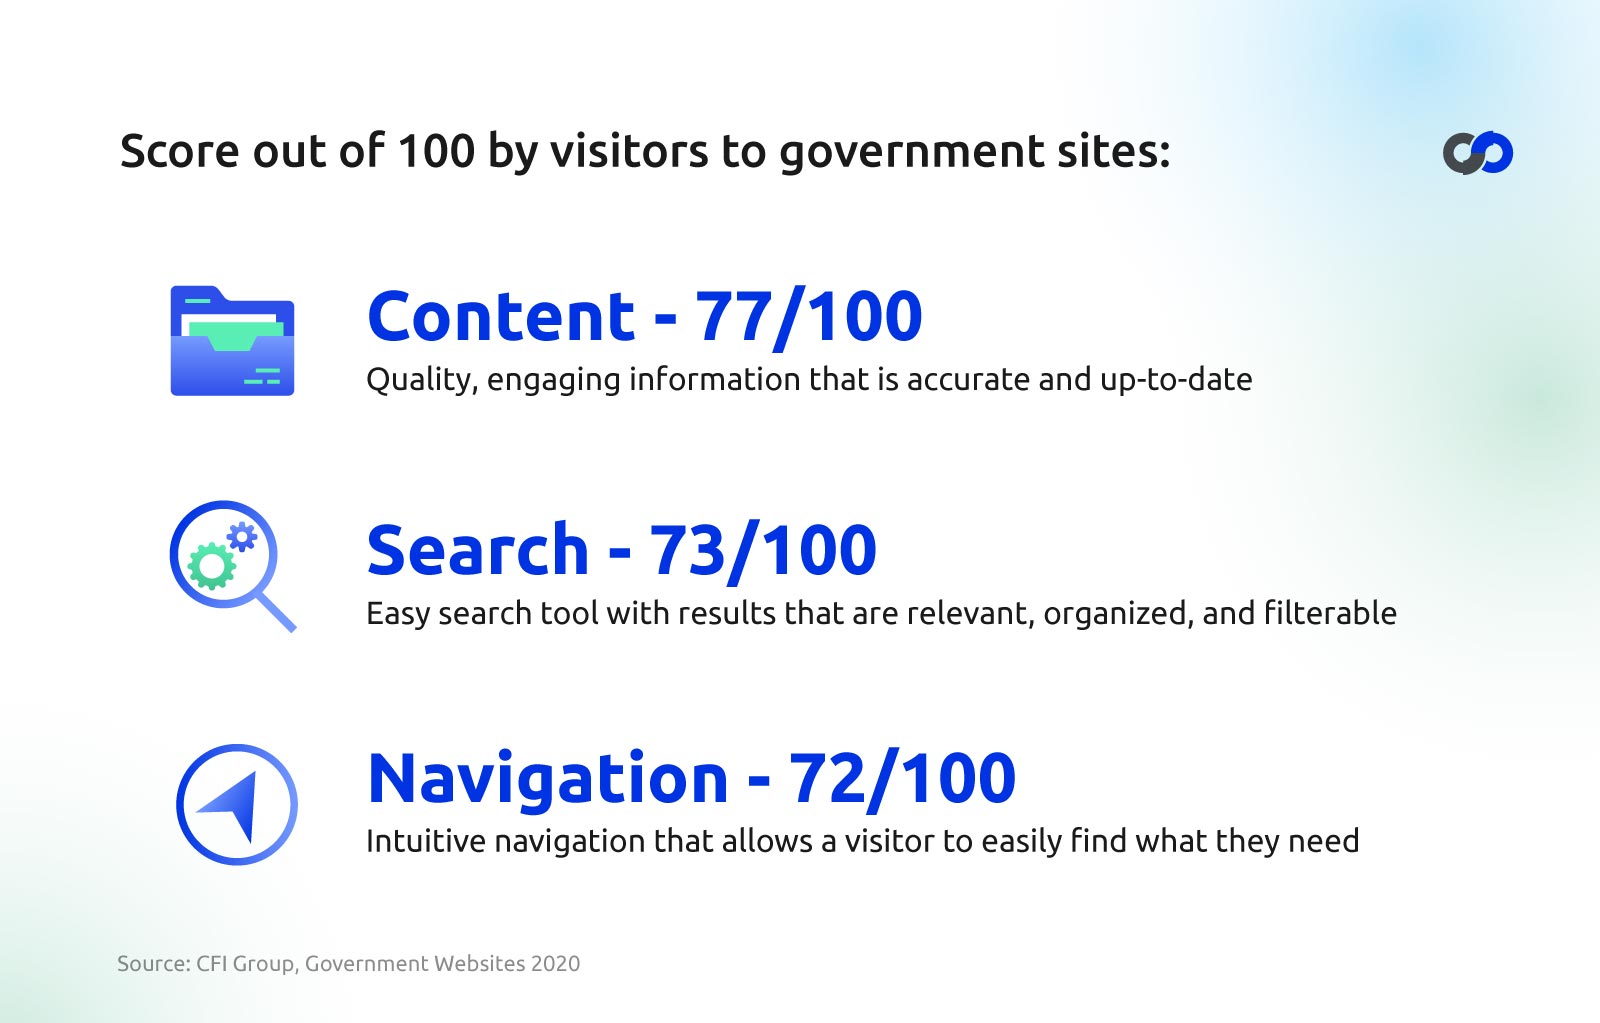 Score out of 100 by visitors to government sites.